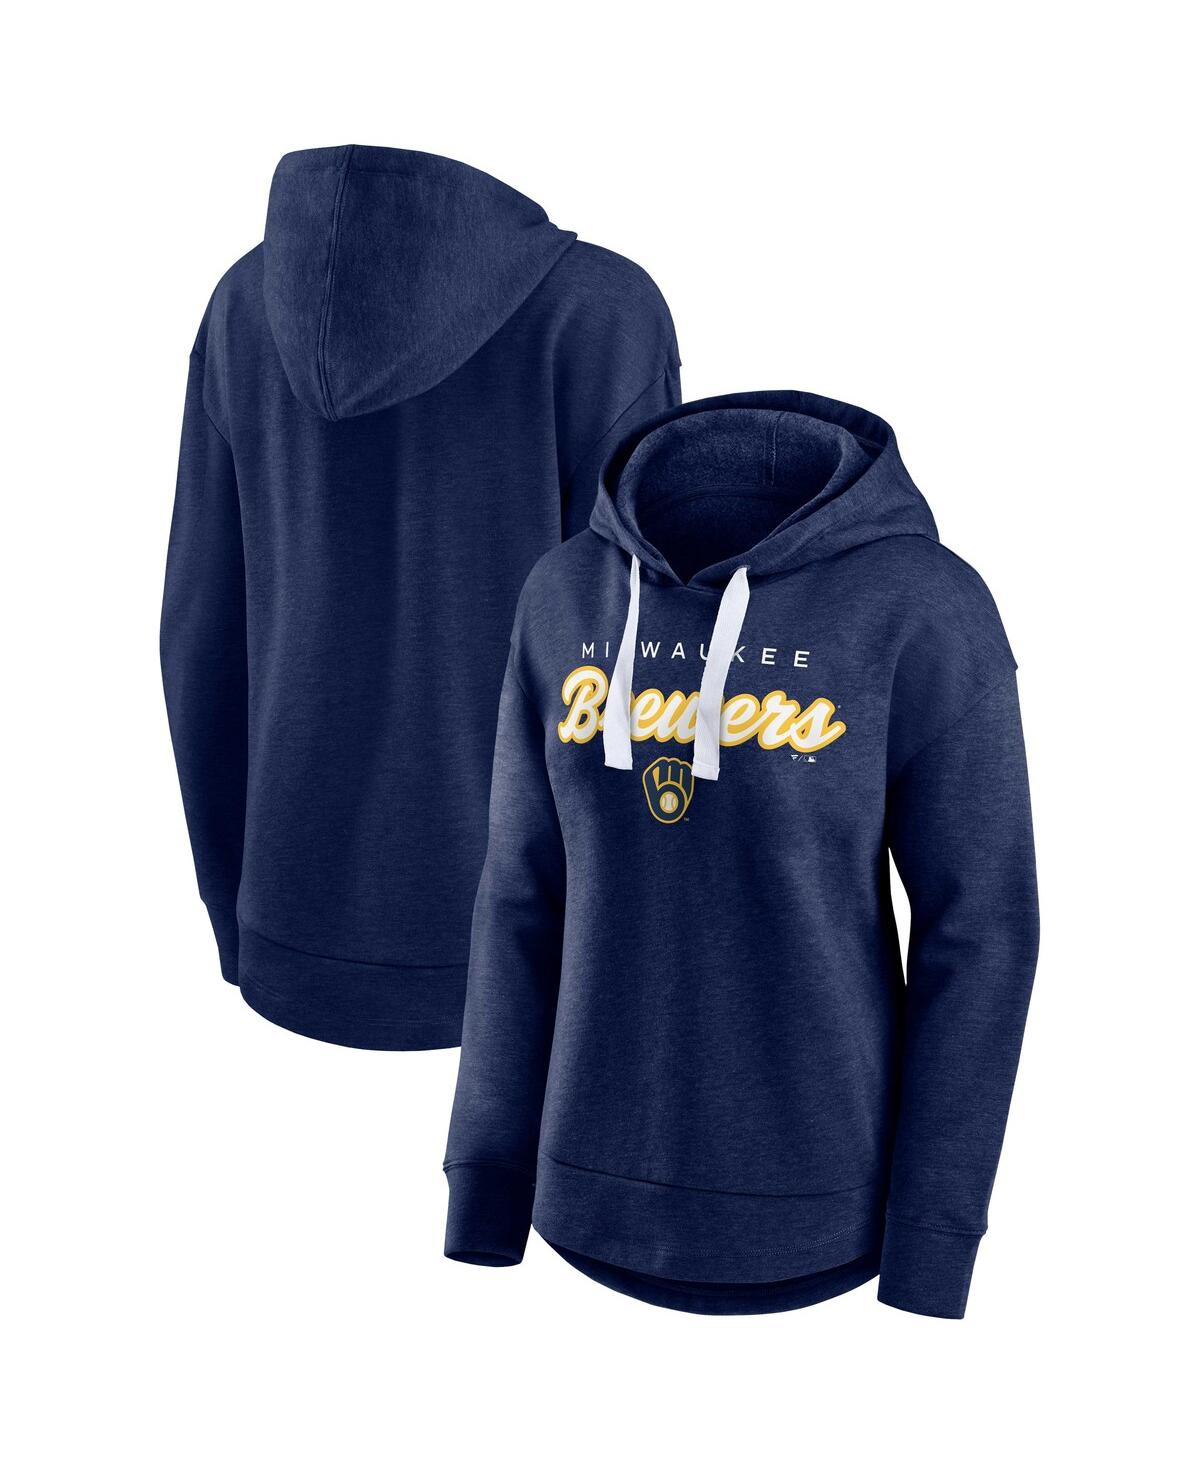 Shop Fanatics Women's  Heathered Navy Milwaukee Brewers Set To Fly Pullover Hoodie